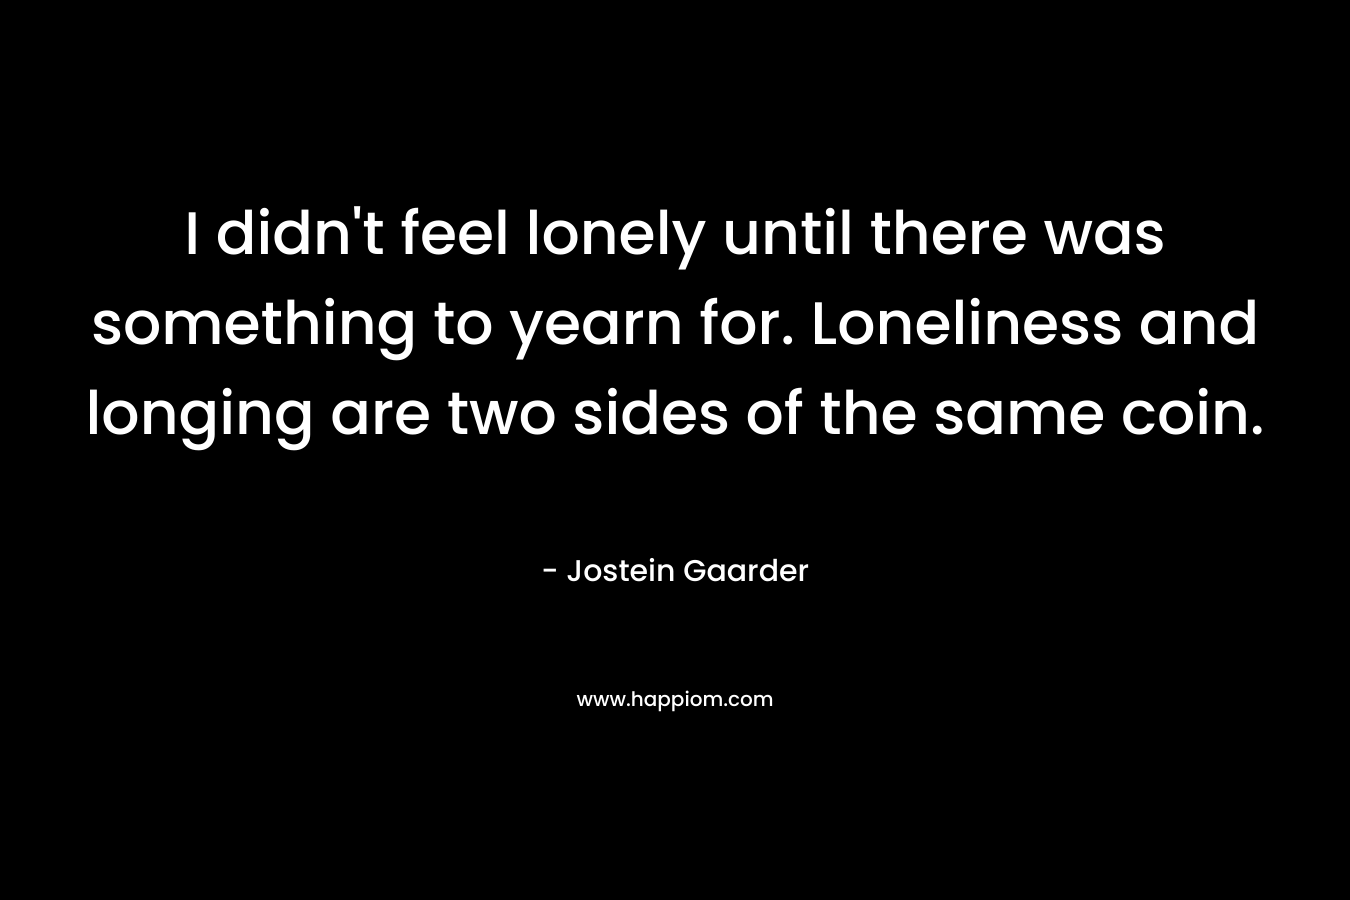 I didn't feel lonely until there was something to yearn for. Loneliness and longing are two sides of the same coin.